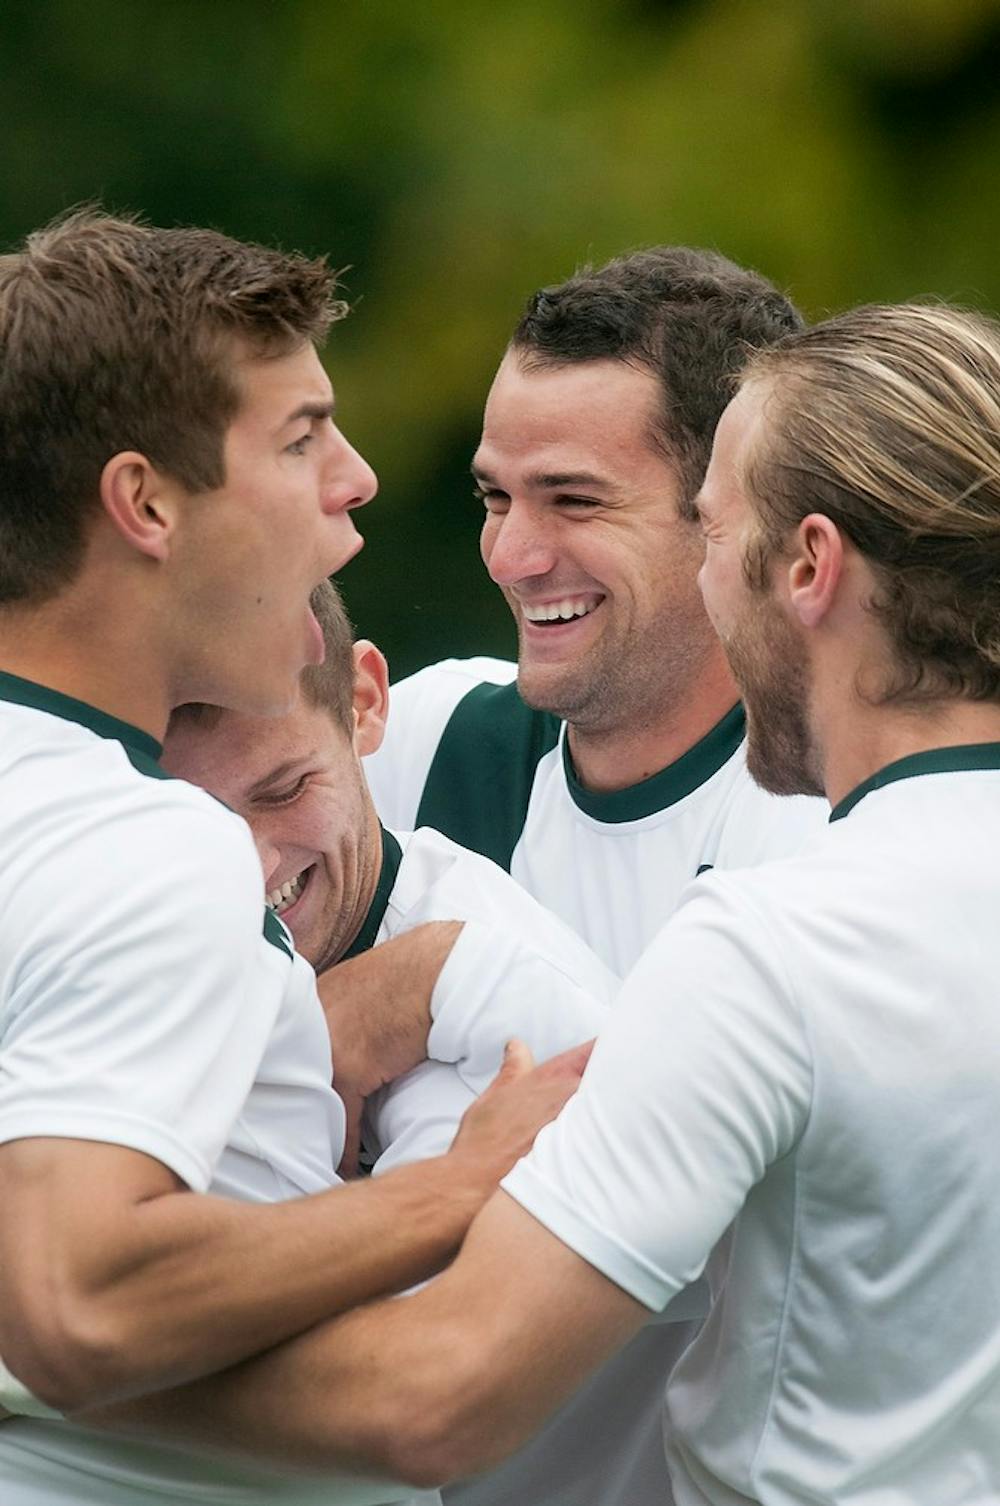 	<p>From left, senior defender Kevin Cope, junior forwards Tim Kreutz and Adam Montague, and junior defender Ryan Keener celebrate after a goal is scored by sophomore midfielder Jay Chapman during the game against Oakland, Oct. 16, 2013, at DeMartin Soccer Stadium at Old College Field. <span class="caps">MSU</span> defeated Oakland 3-0. Danyelle Morrow/The State News</p>